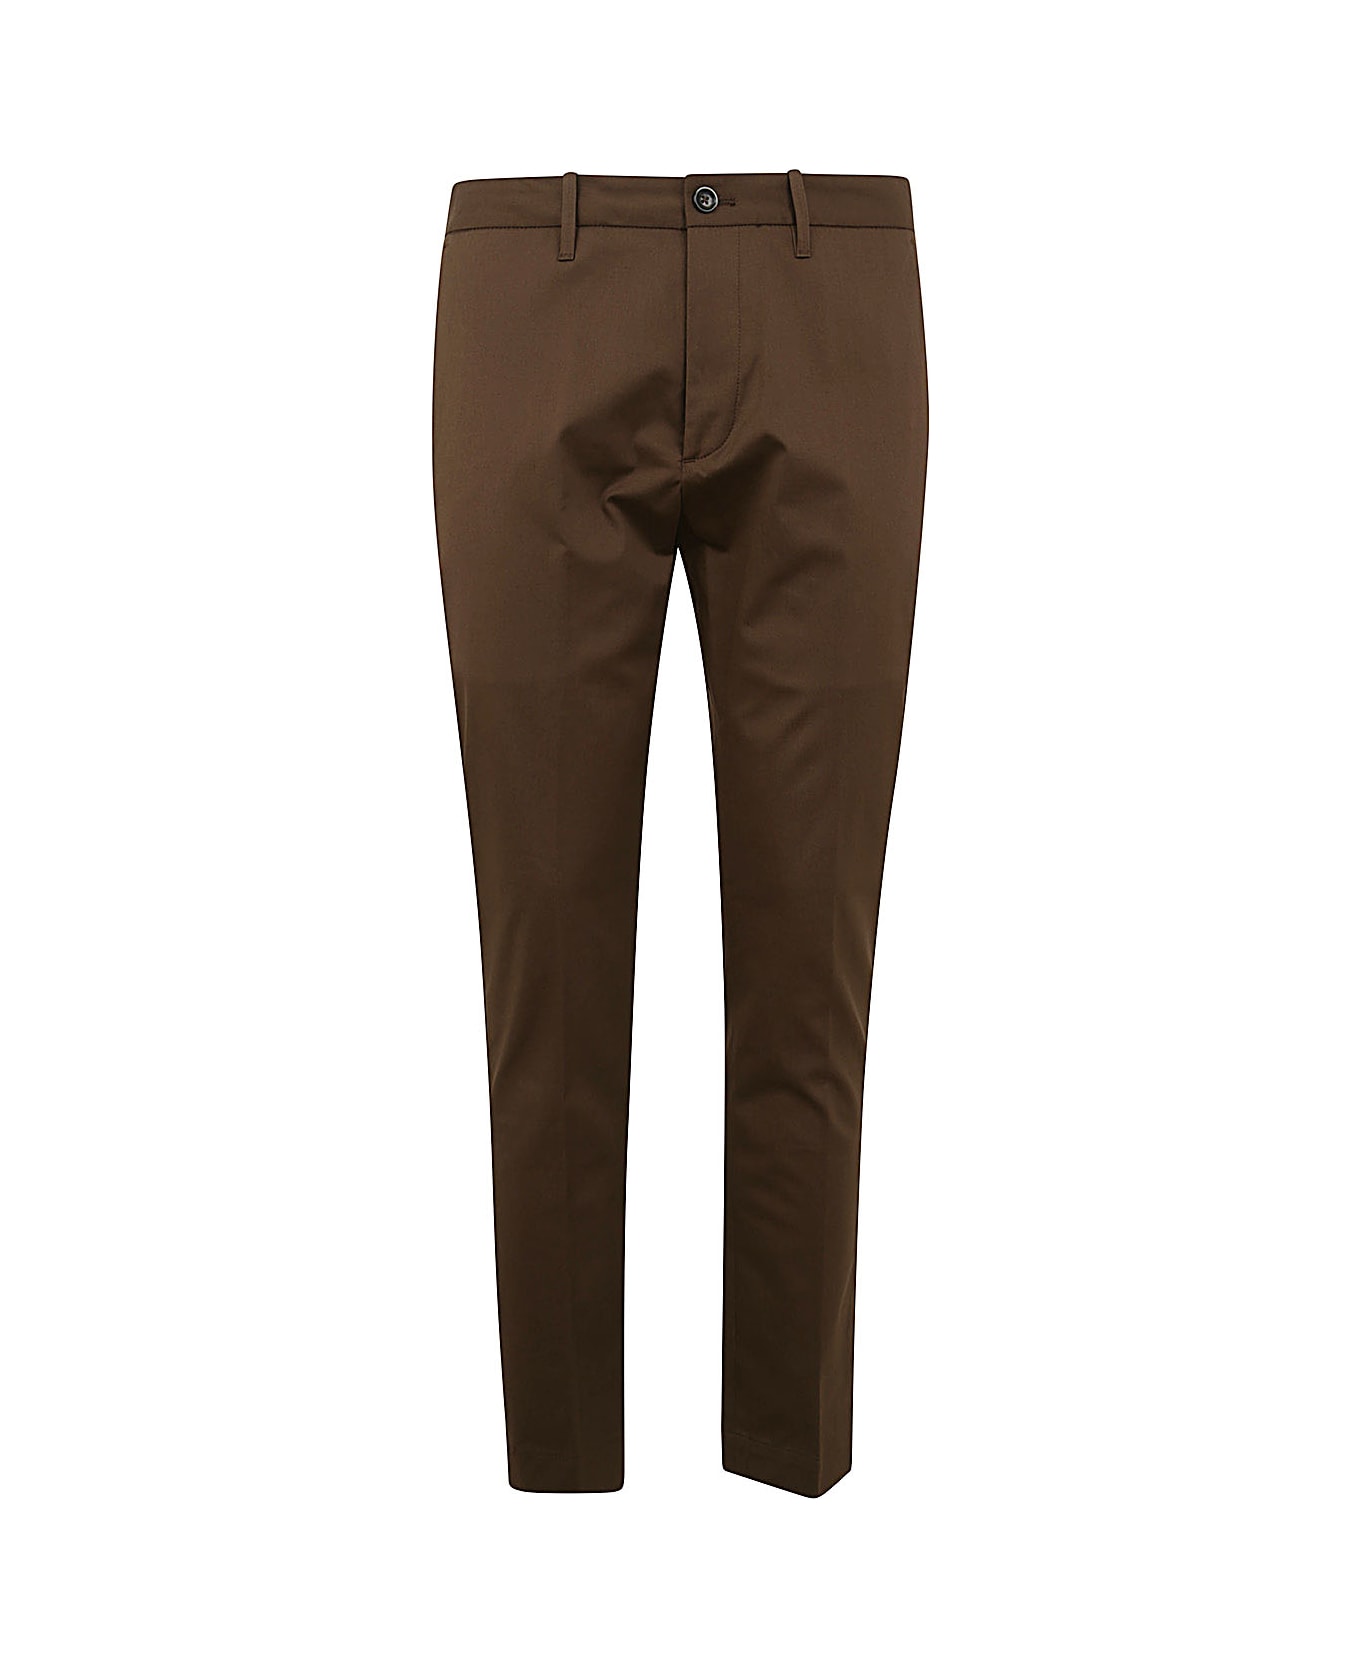 Nine in the Morning Easy Chino Slim Trouser - Coffee ボトムス